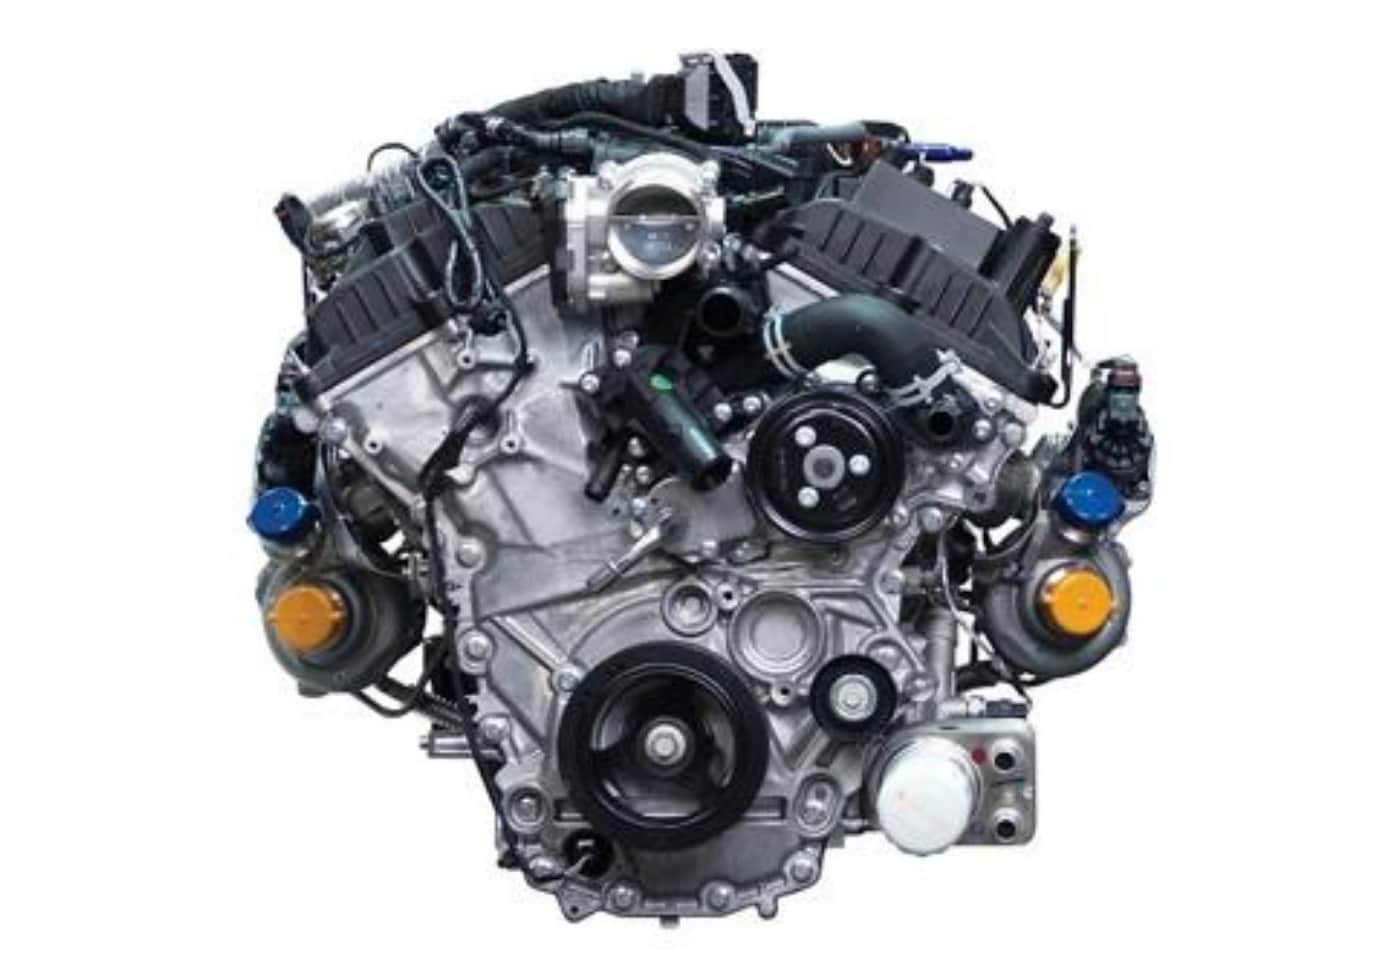 High-Output 3.5L EcoBoost V6 engine available on the Ford F-150